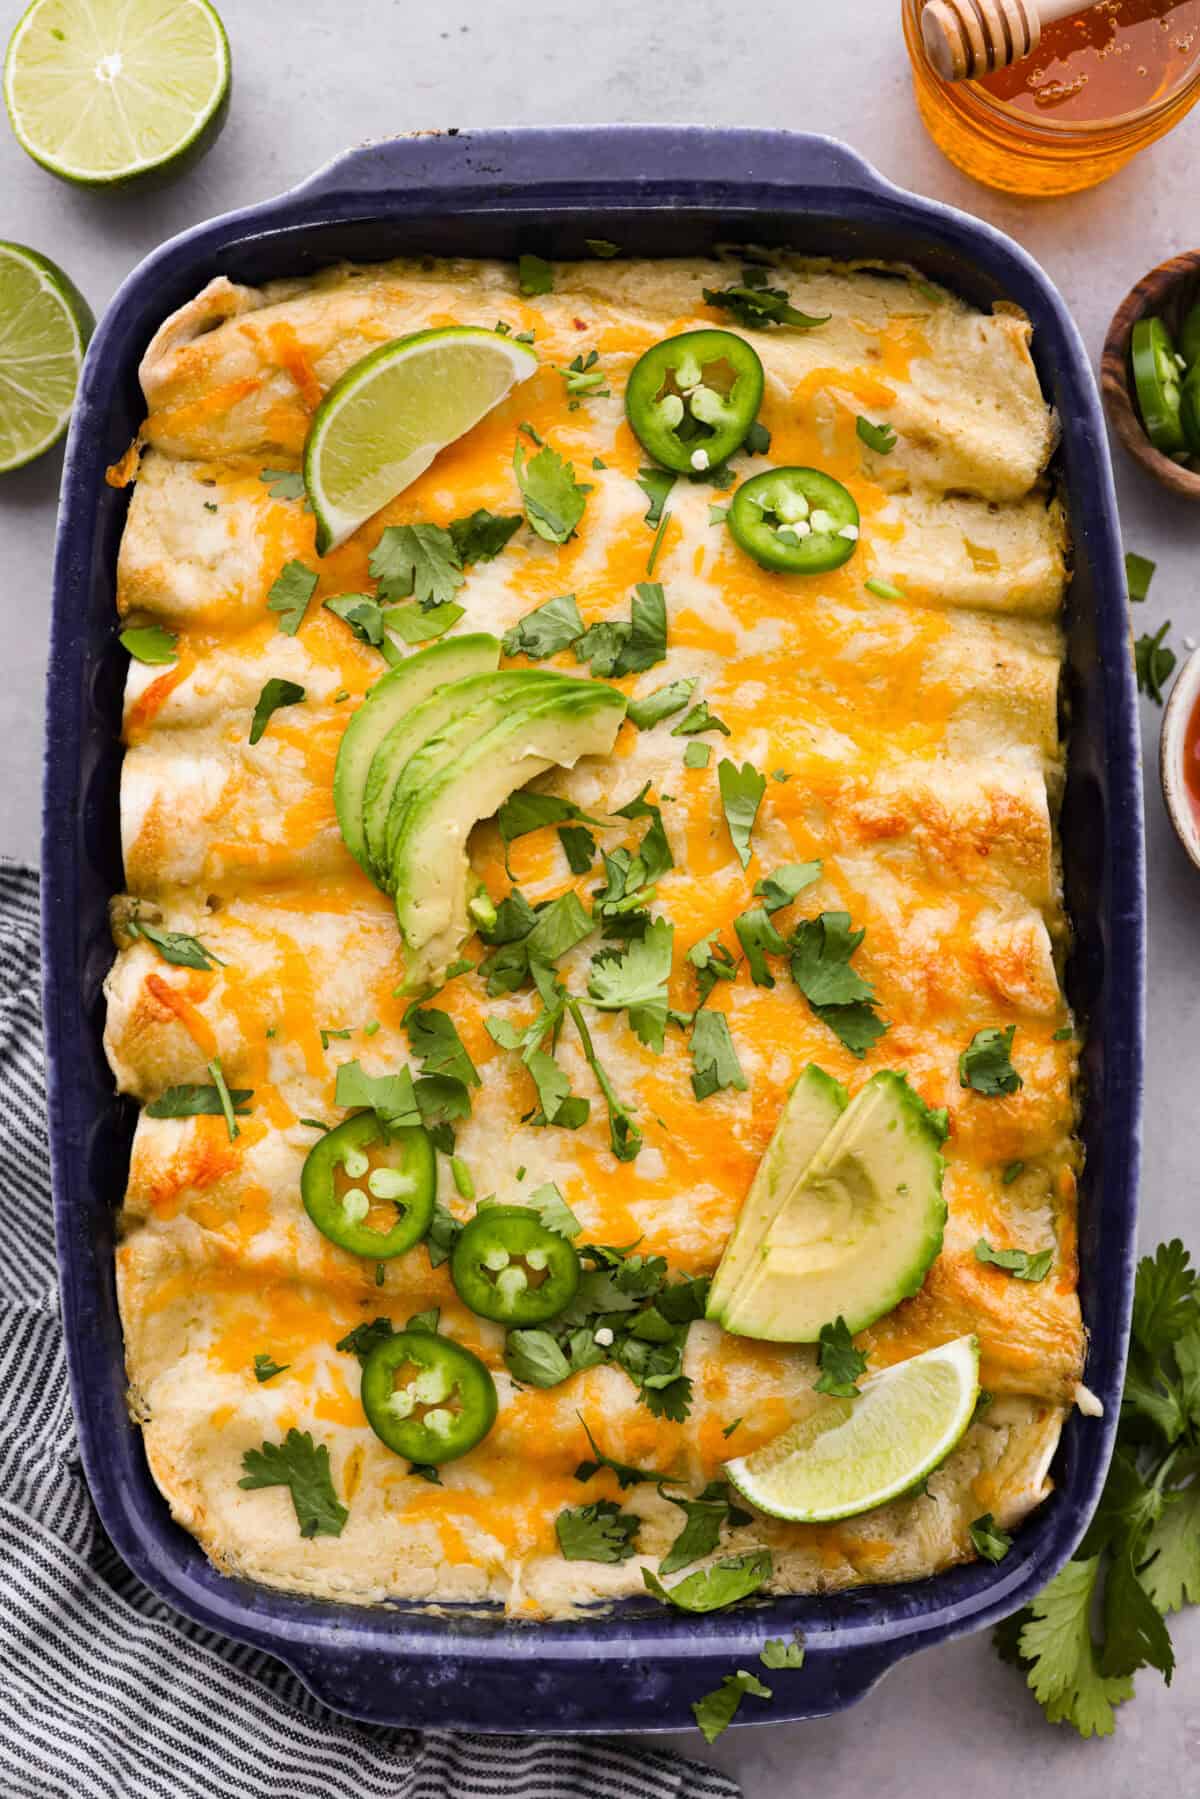 Top view of honey lime chicken enchiladas in a baking dish.